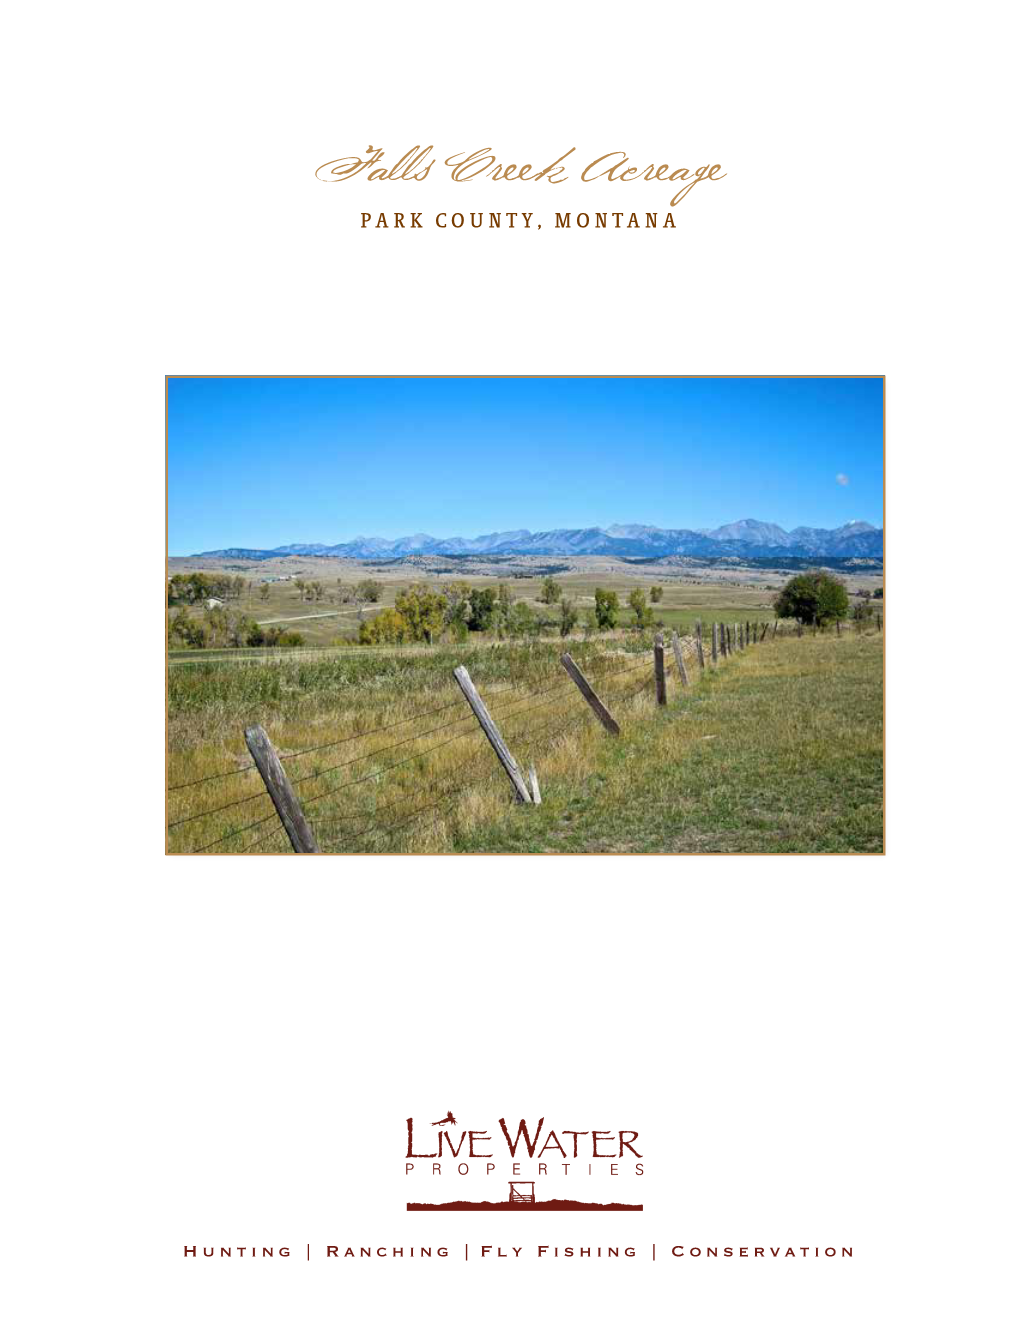 Falls Creek Acreage Represents an Exciting and Diverse Rural Offering in One of the Most Spectacular Regions of the Treasure State